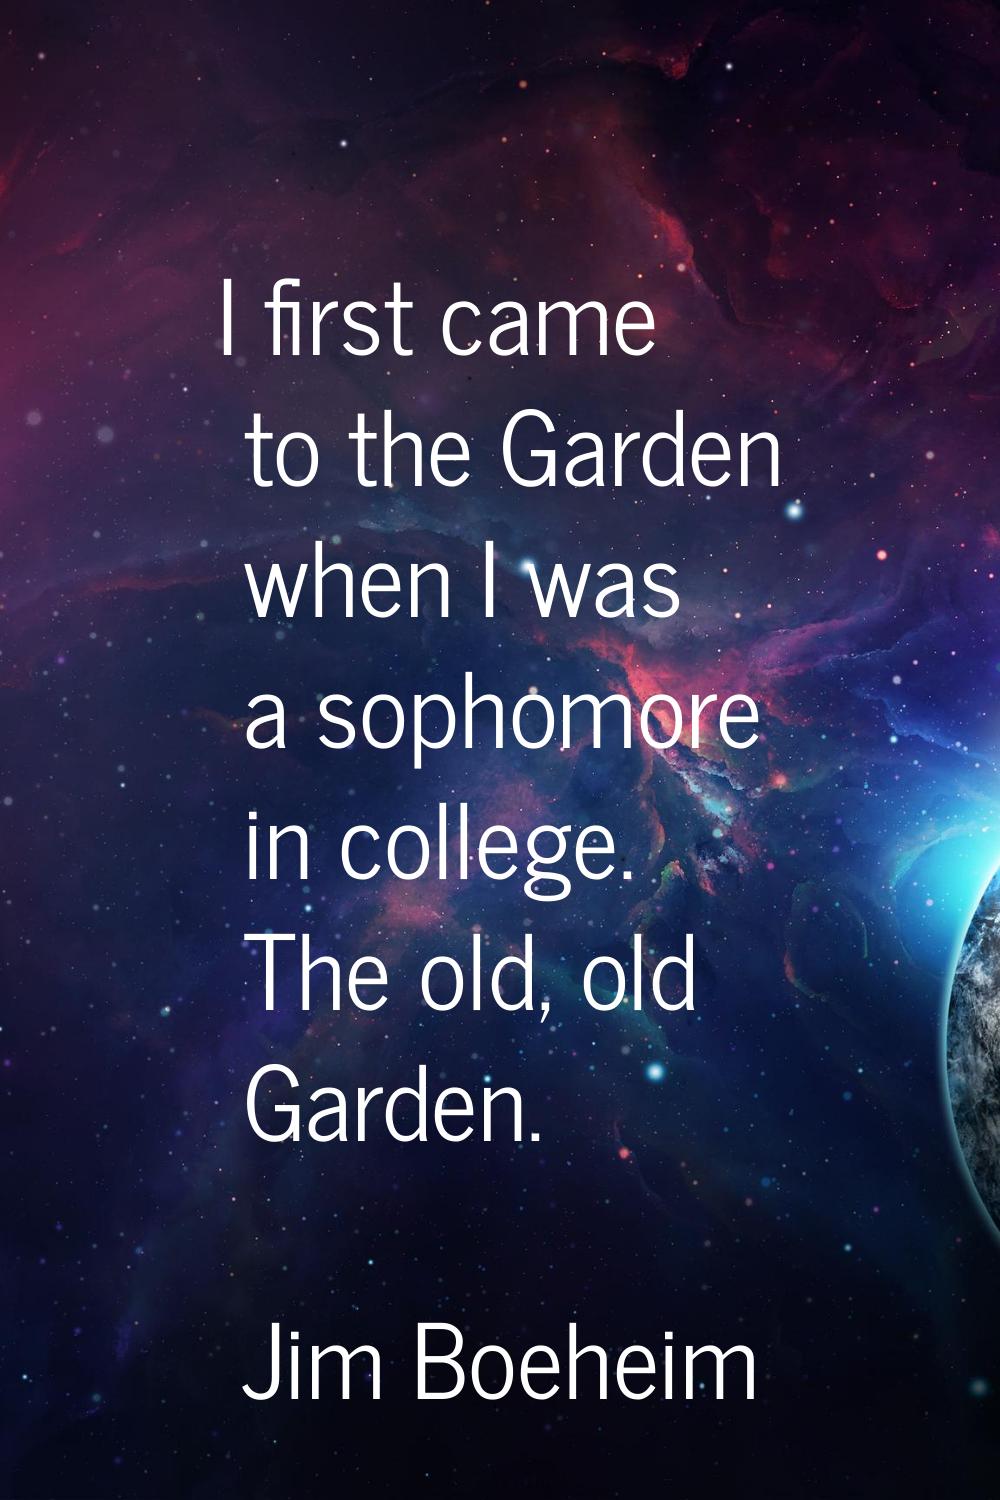 I first came to the Garden when I was a sophomore in college. The old, old Garden.